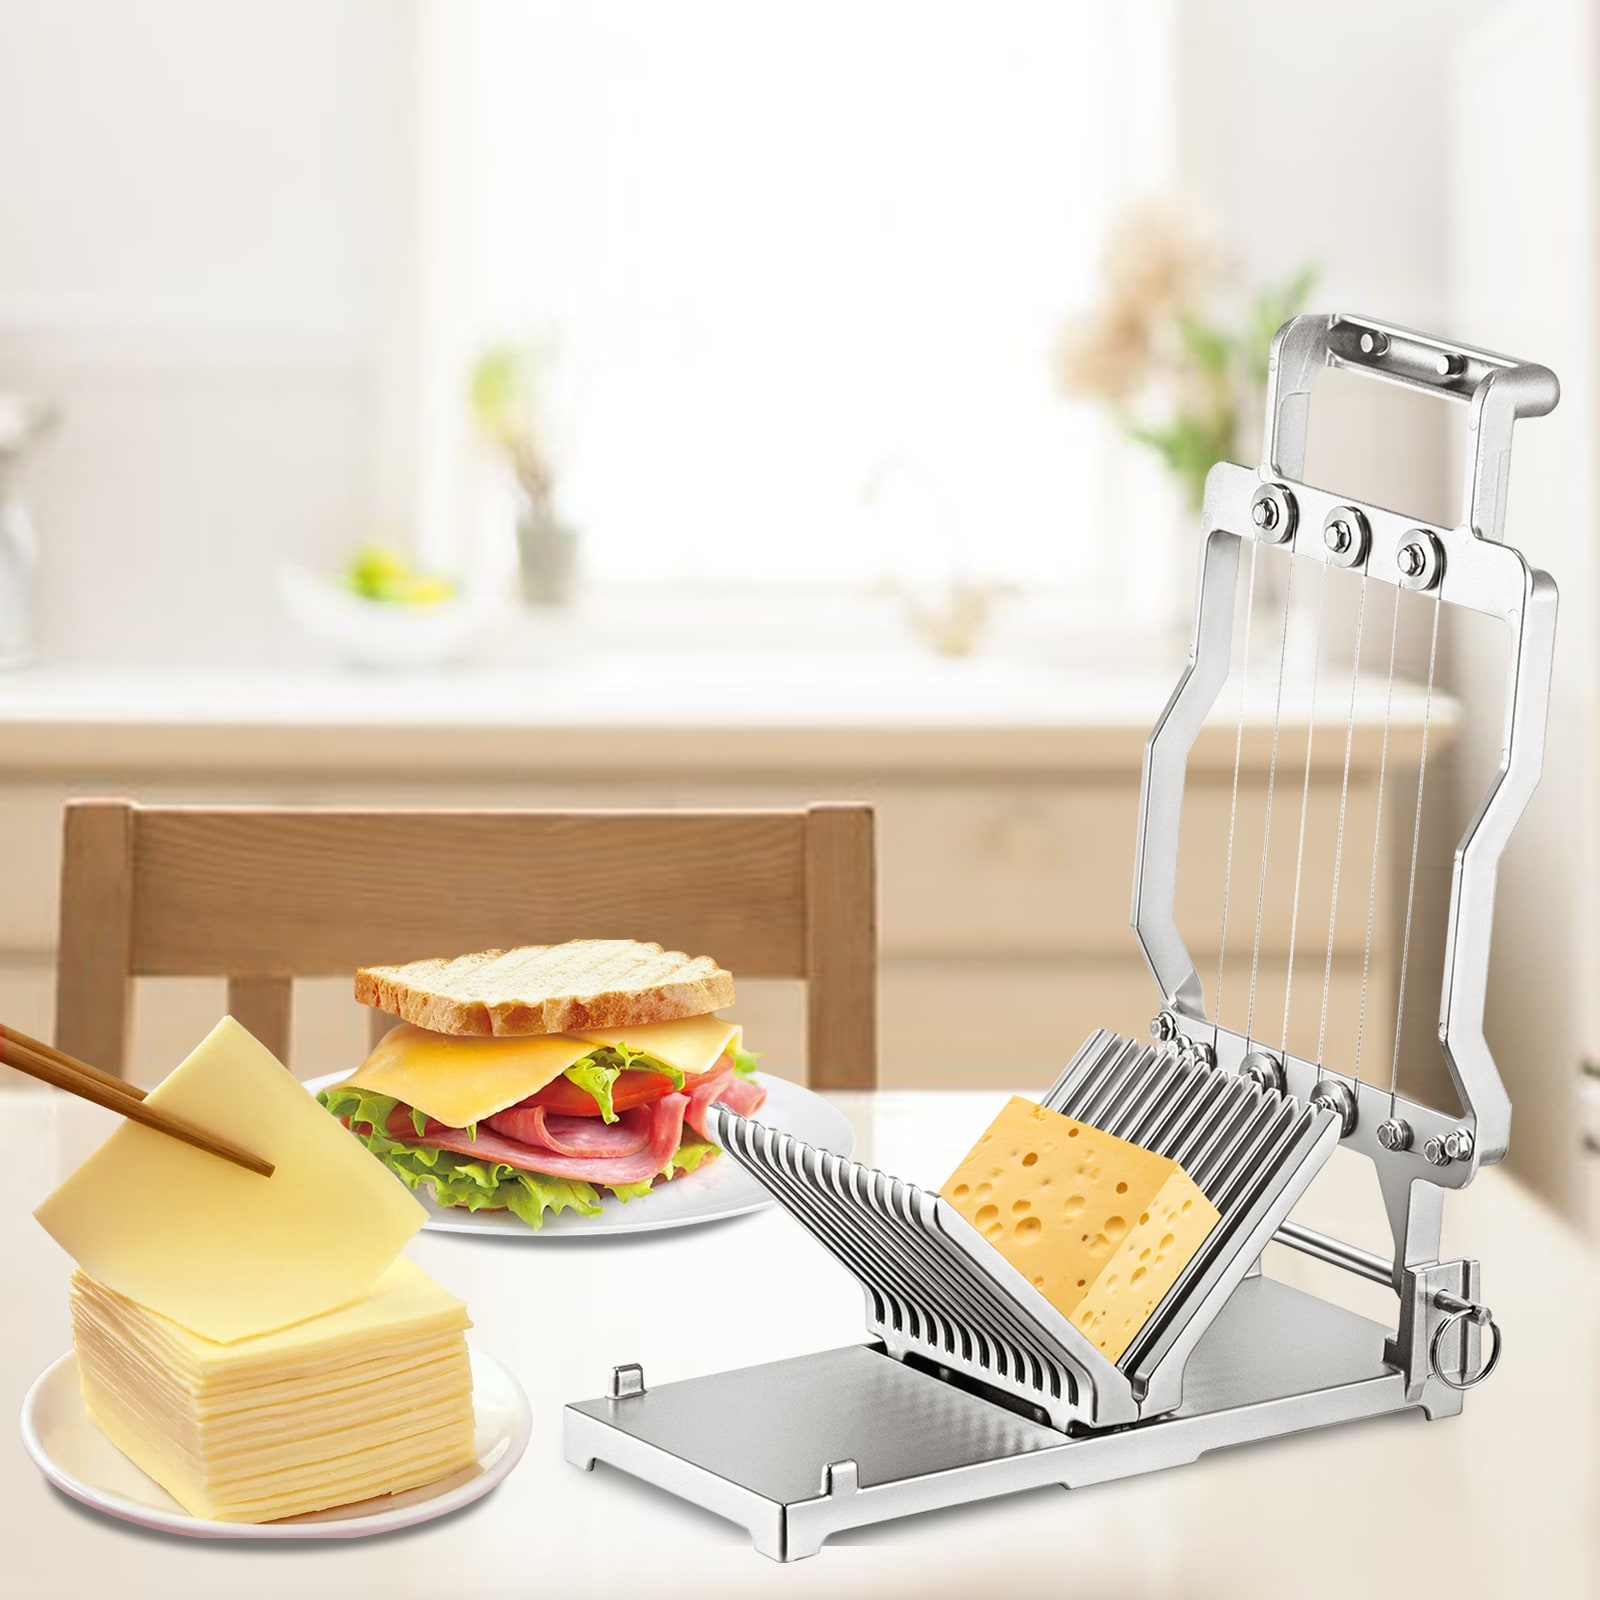 OXO Good Grips Cheese Slicer with Replaceable Wire Eco-Friendly